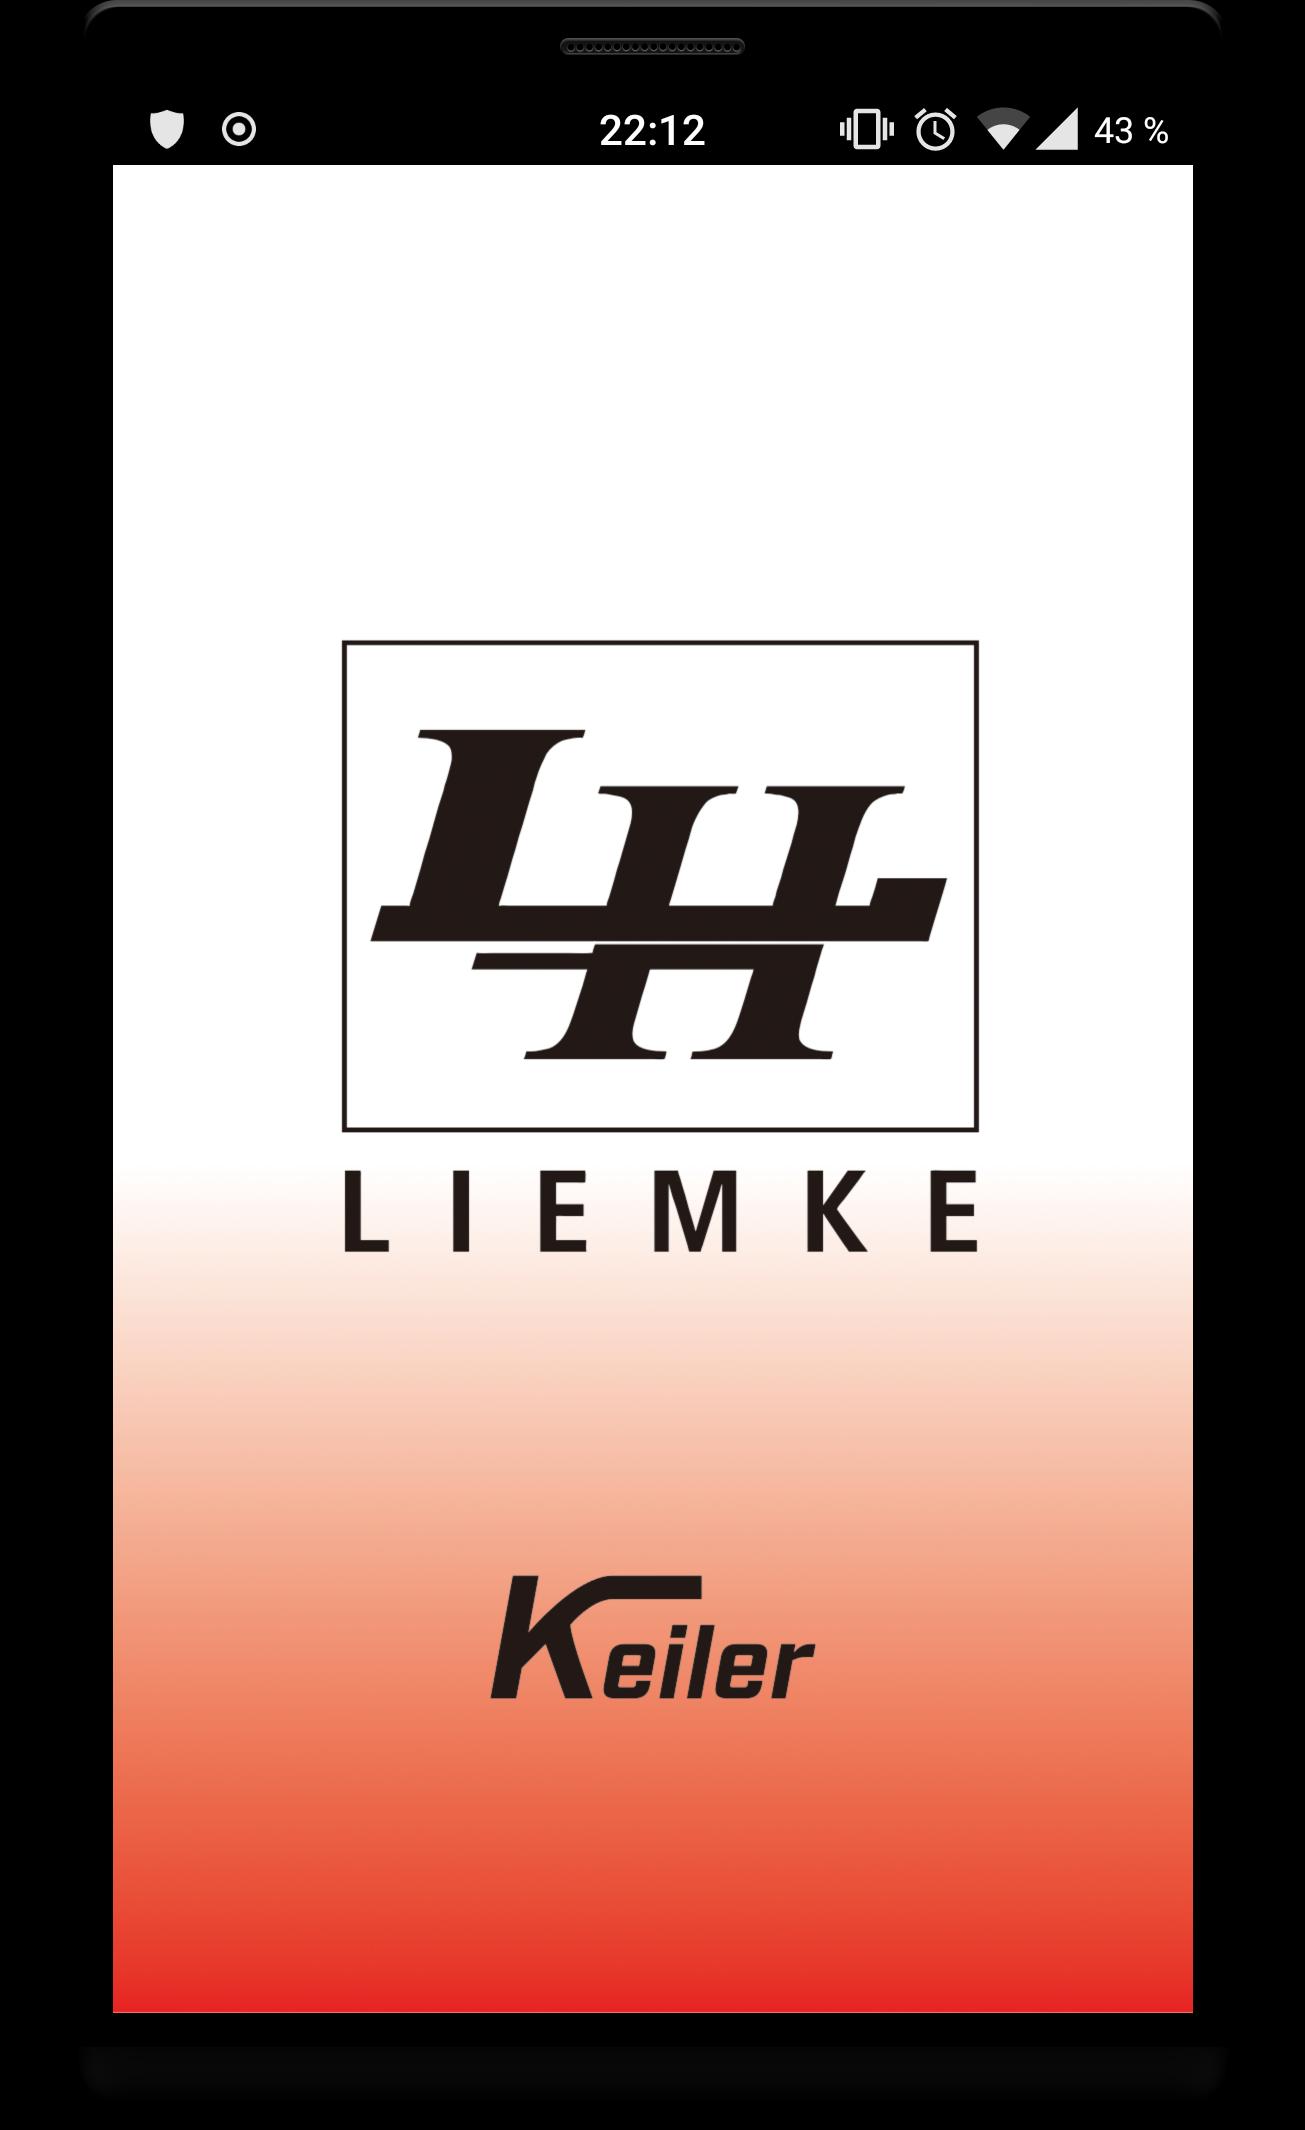 LIEMKE Keiler-Pro for Android - APK Download